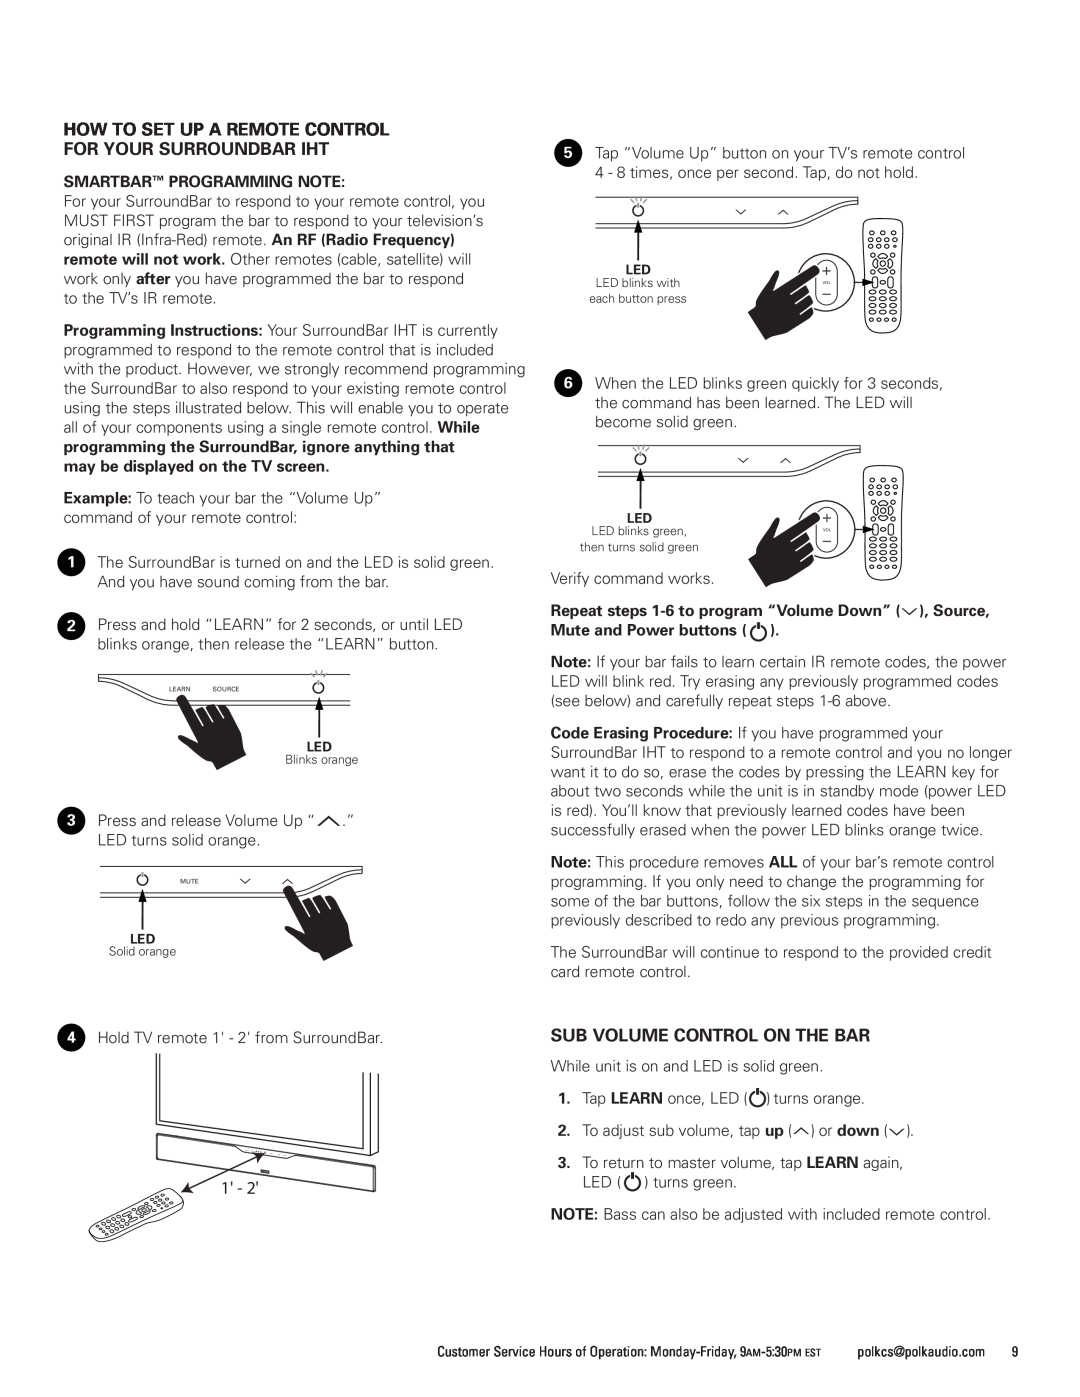 Polk Audio 9000 manual How To Set Up A Remote Control, For Your Surroundbar Iht, Sub Volume Control On The Bar 